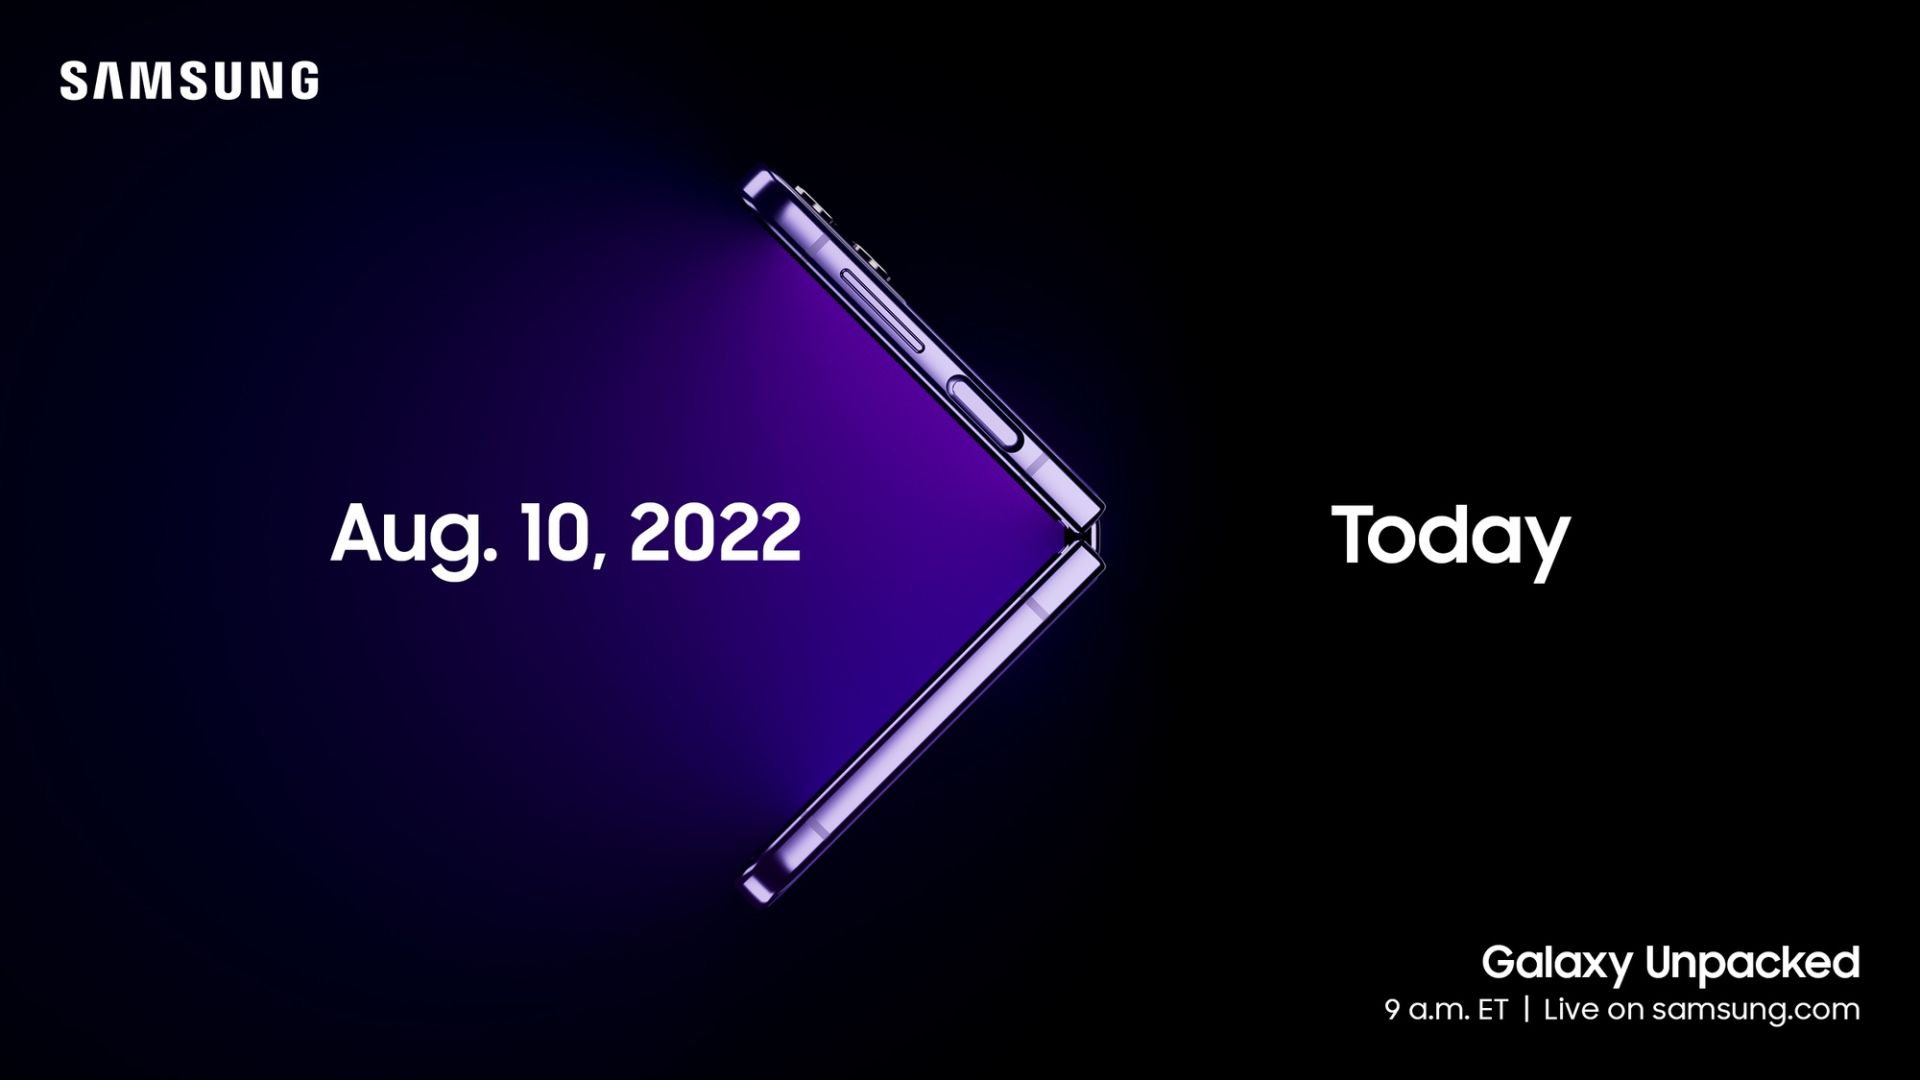 Samsung Galaxy Unpacked Event Poster Shipped 10 million foldable devices